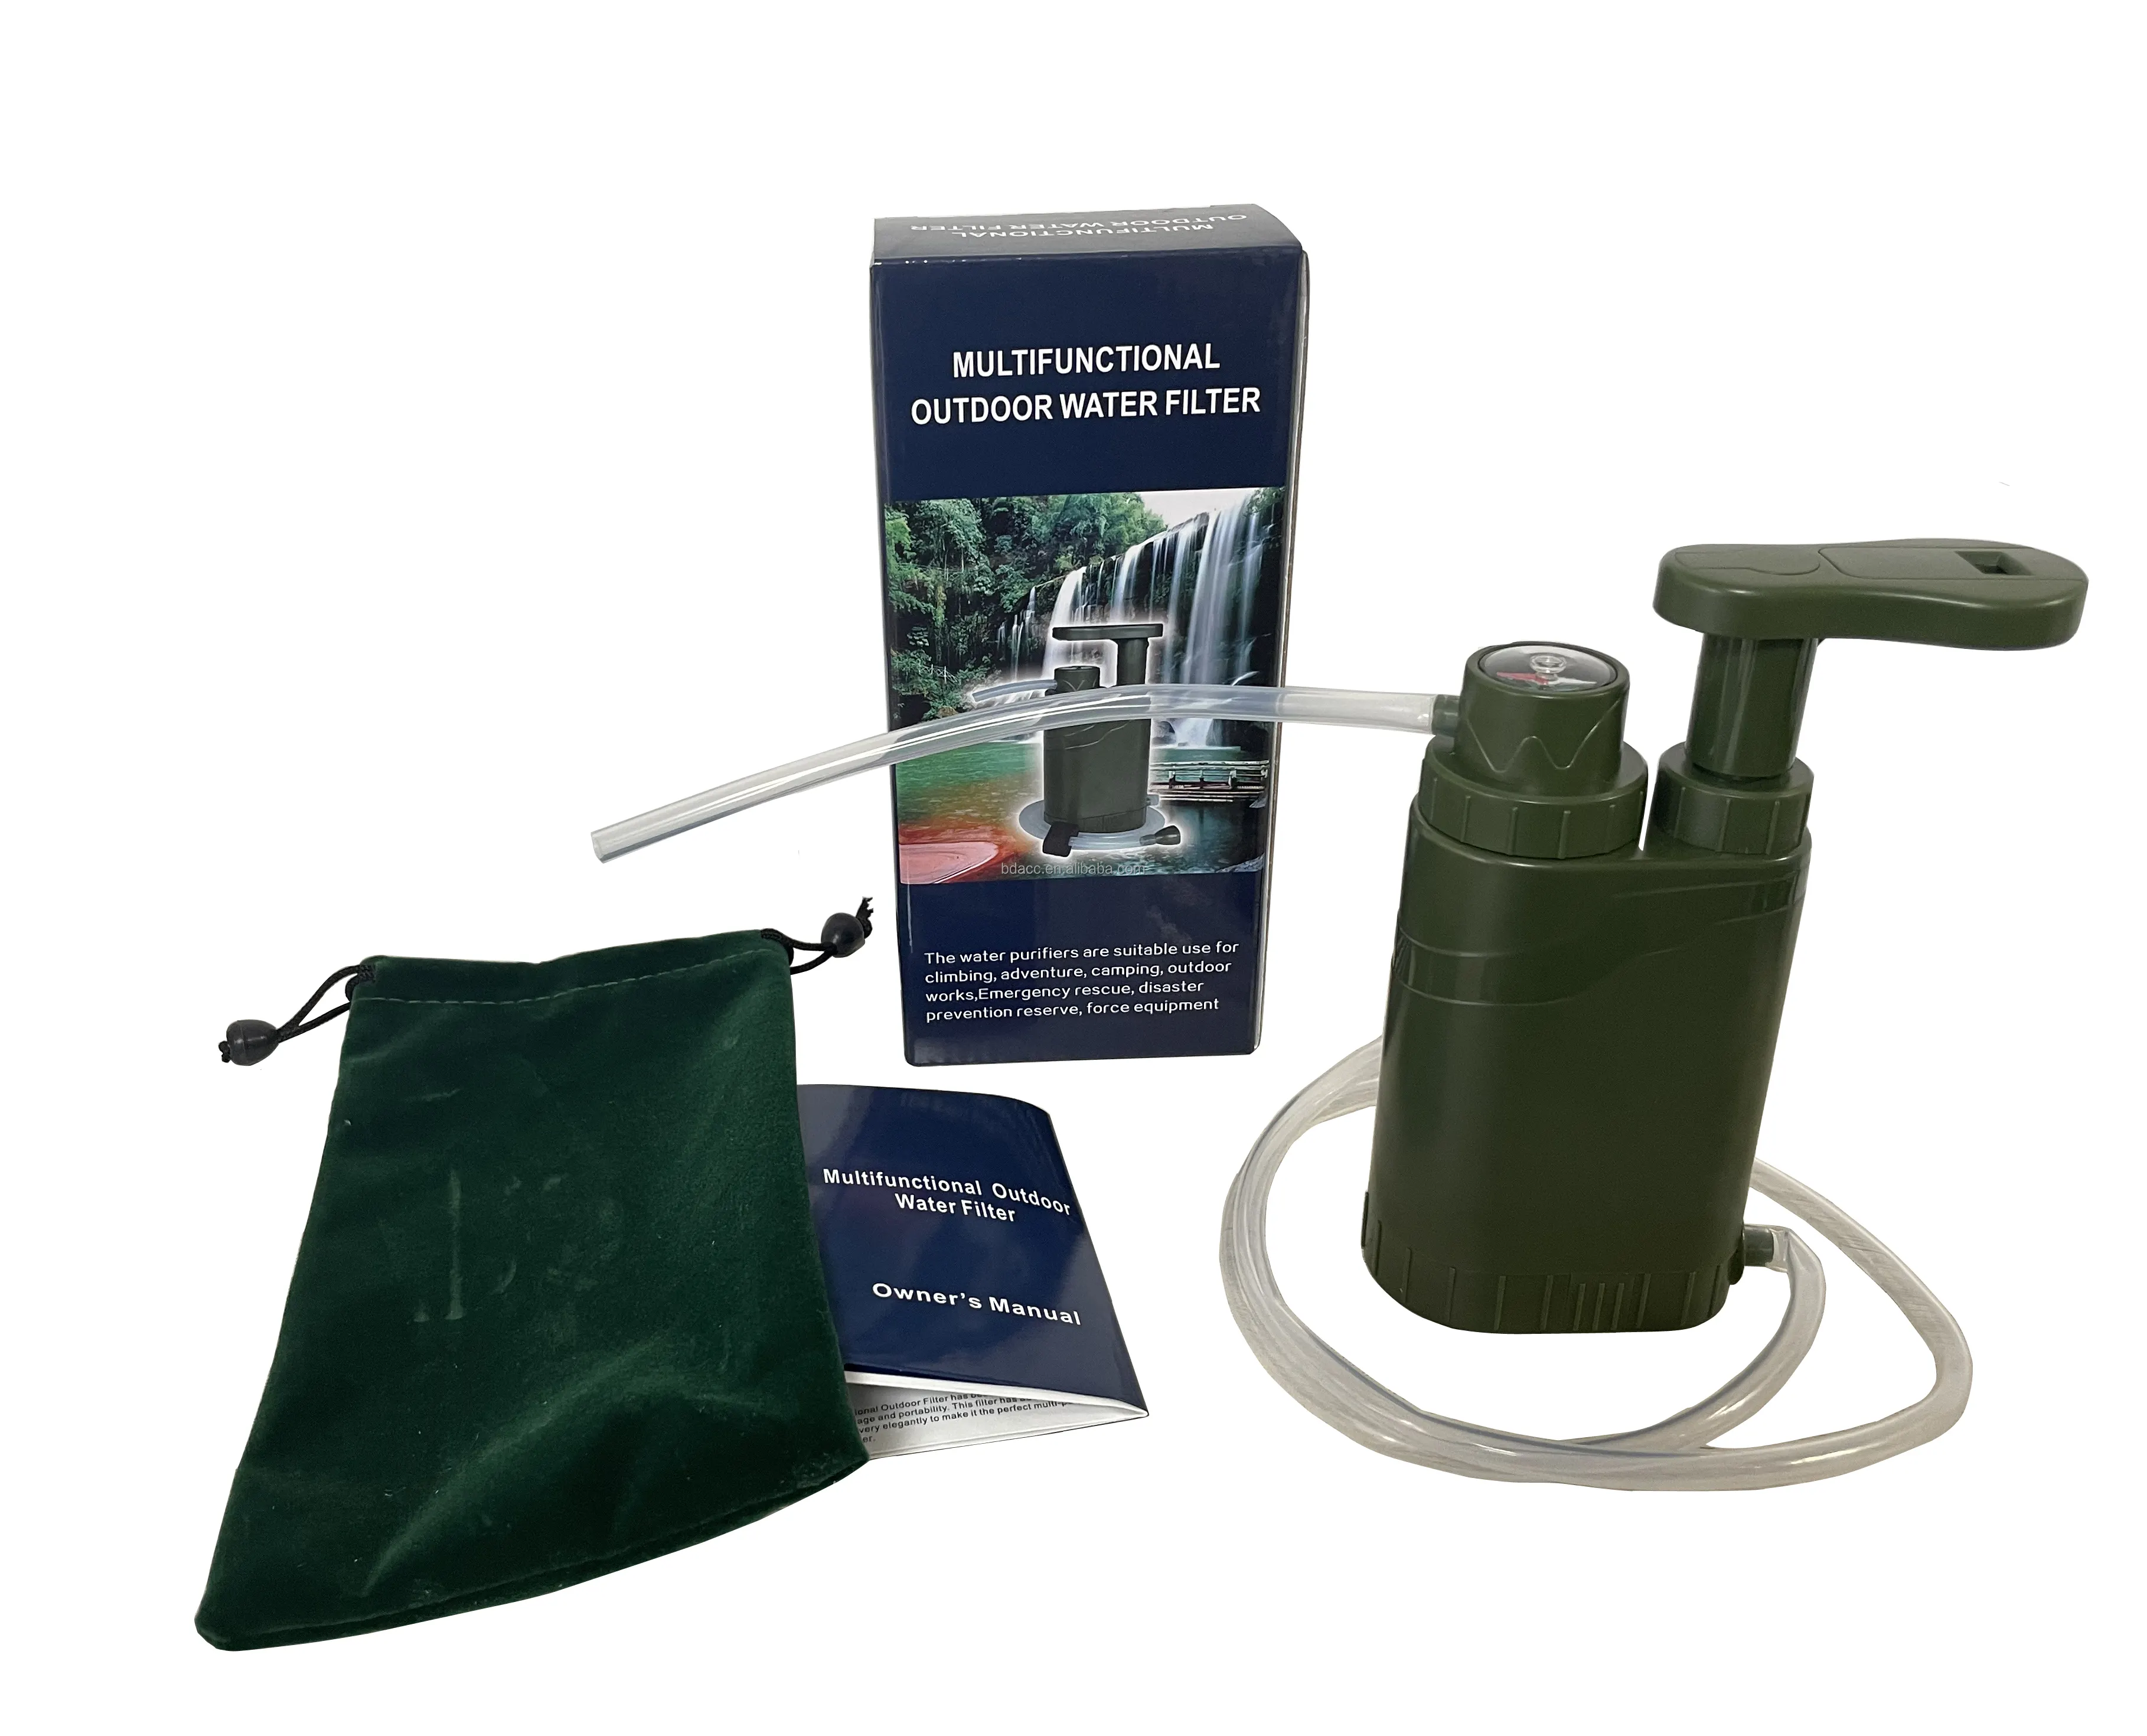 portable hand pump water filter survivor filter 3 Filter Stages, Outdoor Emergency and Survival Gear - Camping, Hiking